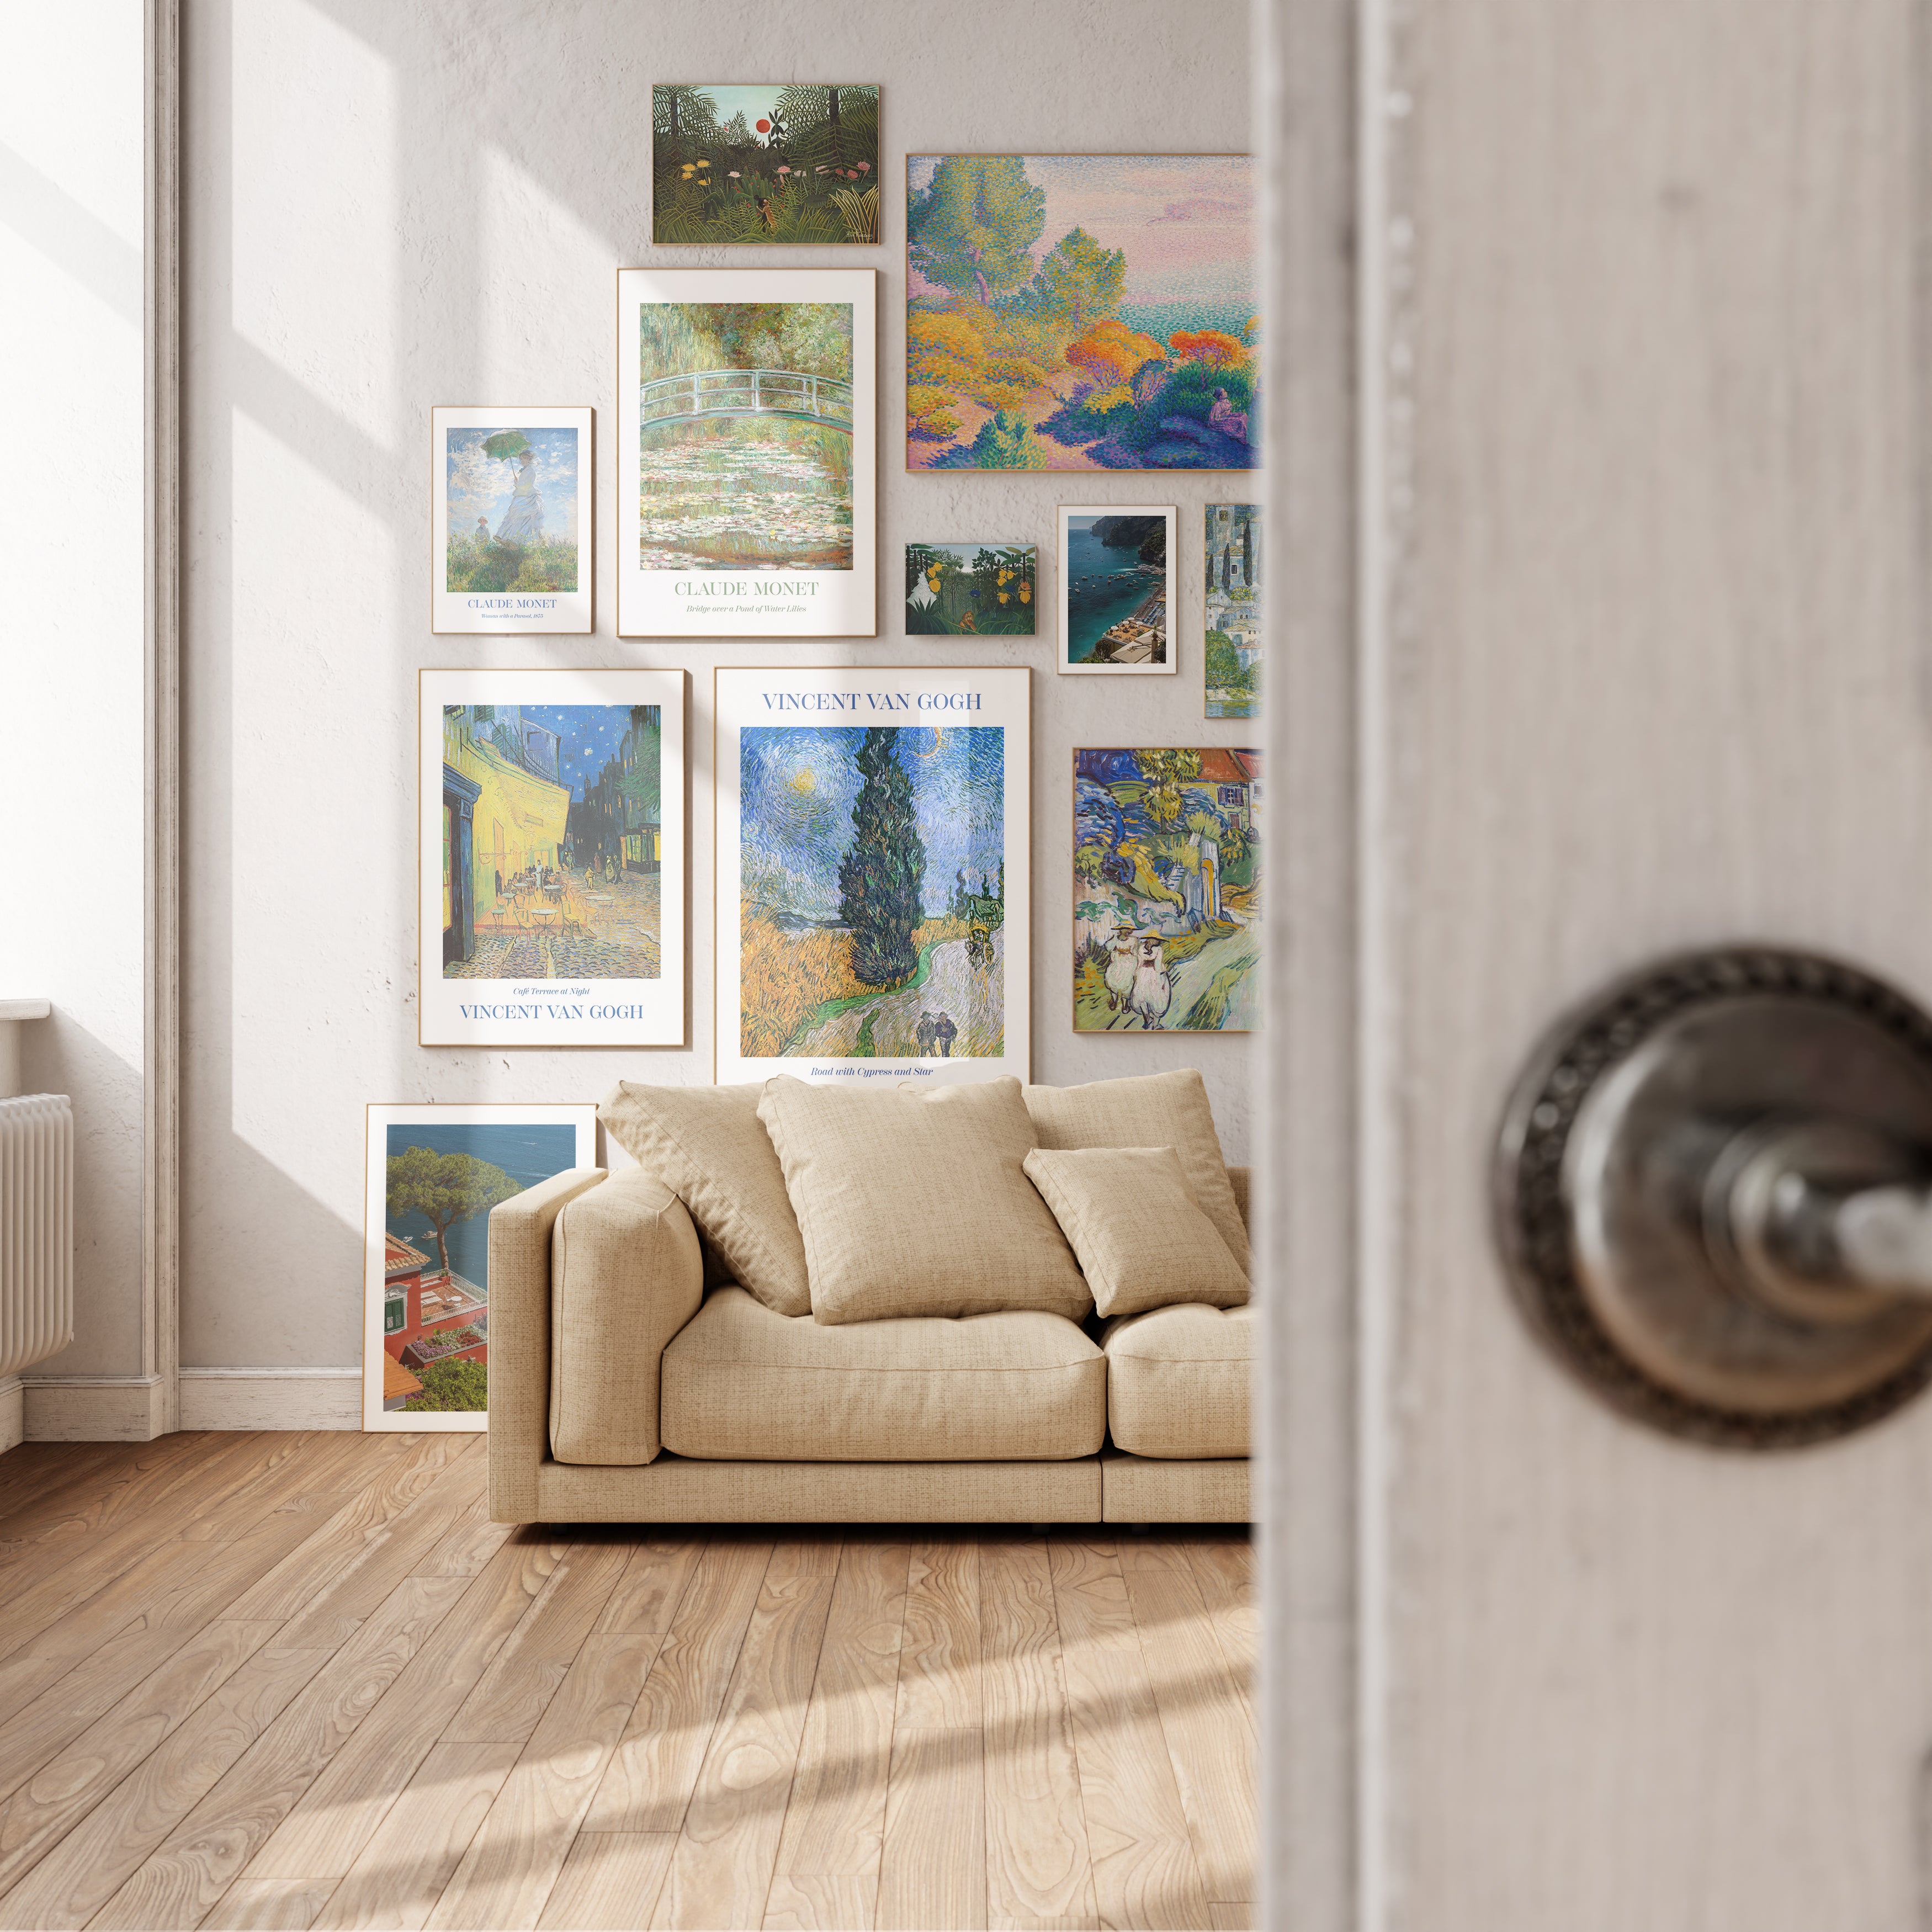 Learn how to build your own art wall in 5 easy steps